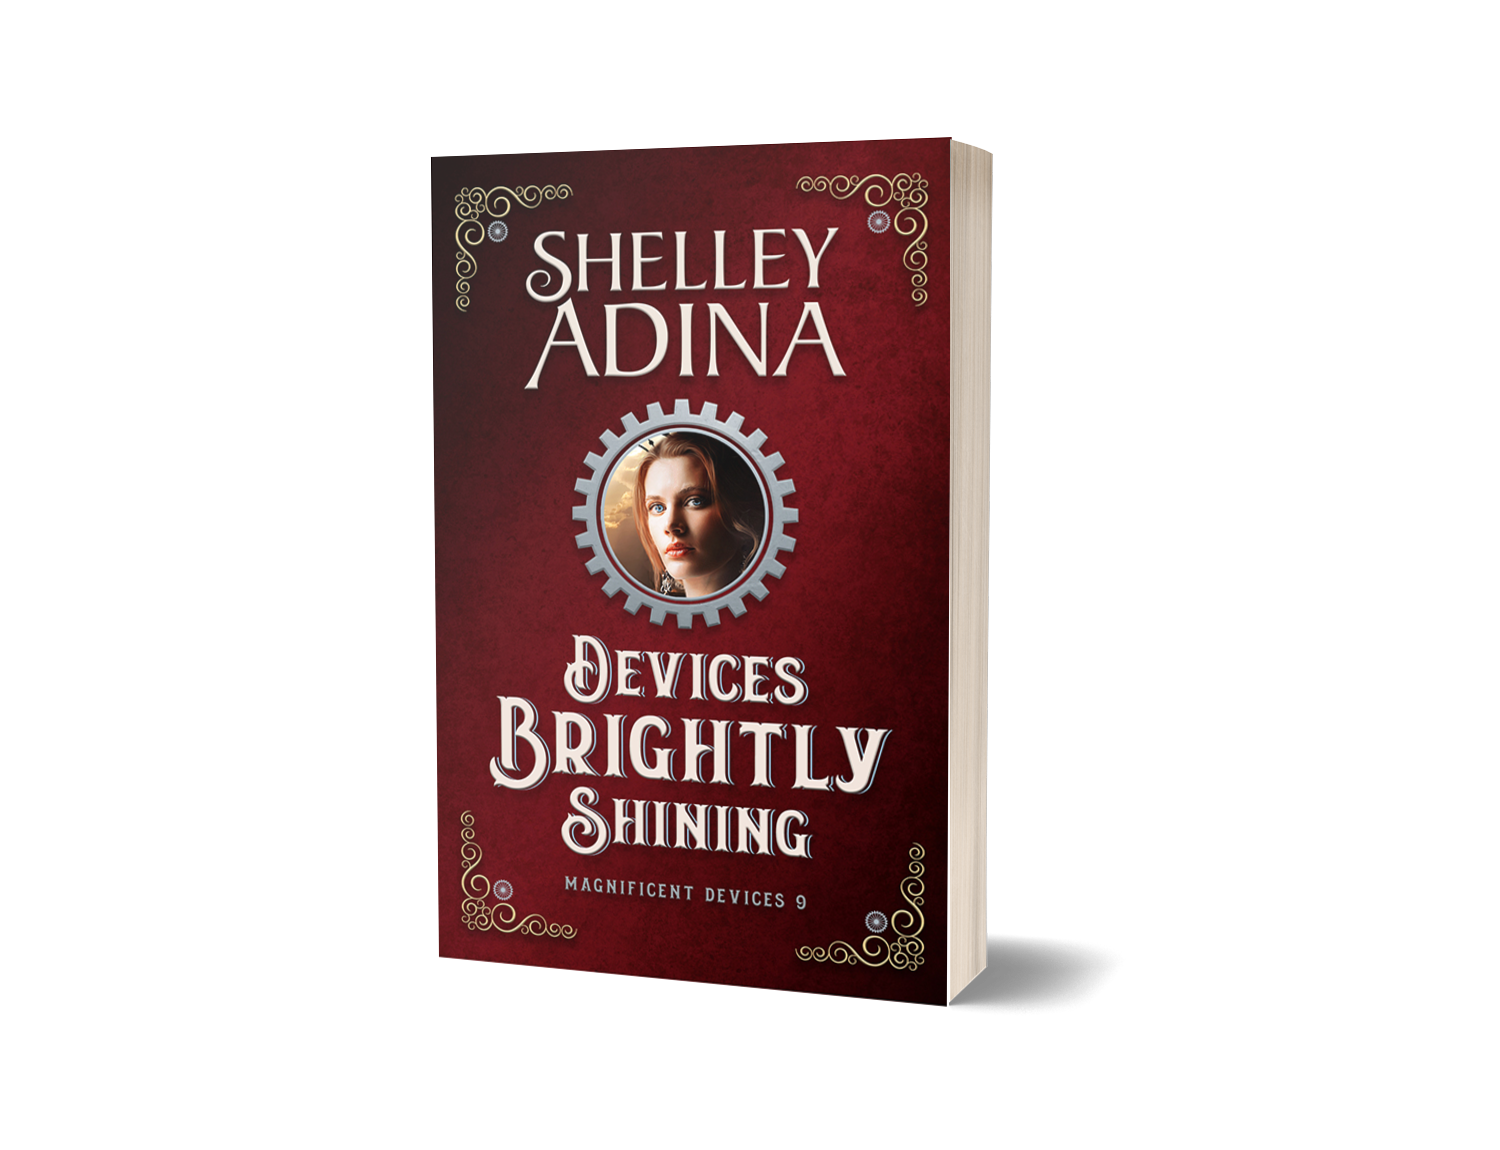 Devices Brightly Shining, a Christmas steampunk adventure novella by Shelley Adina